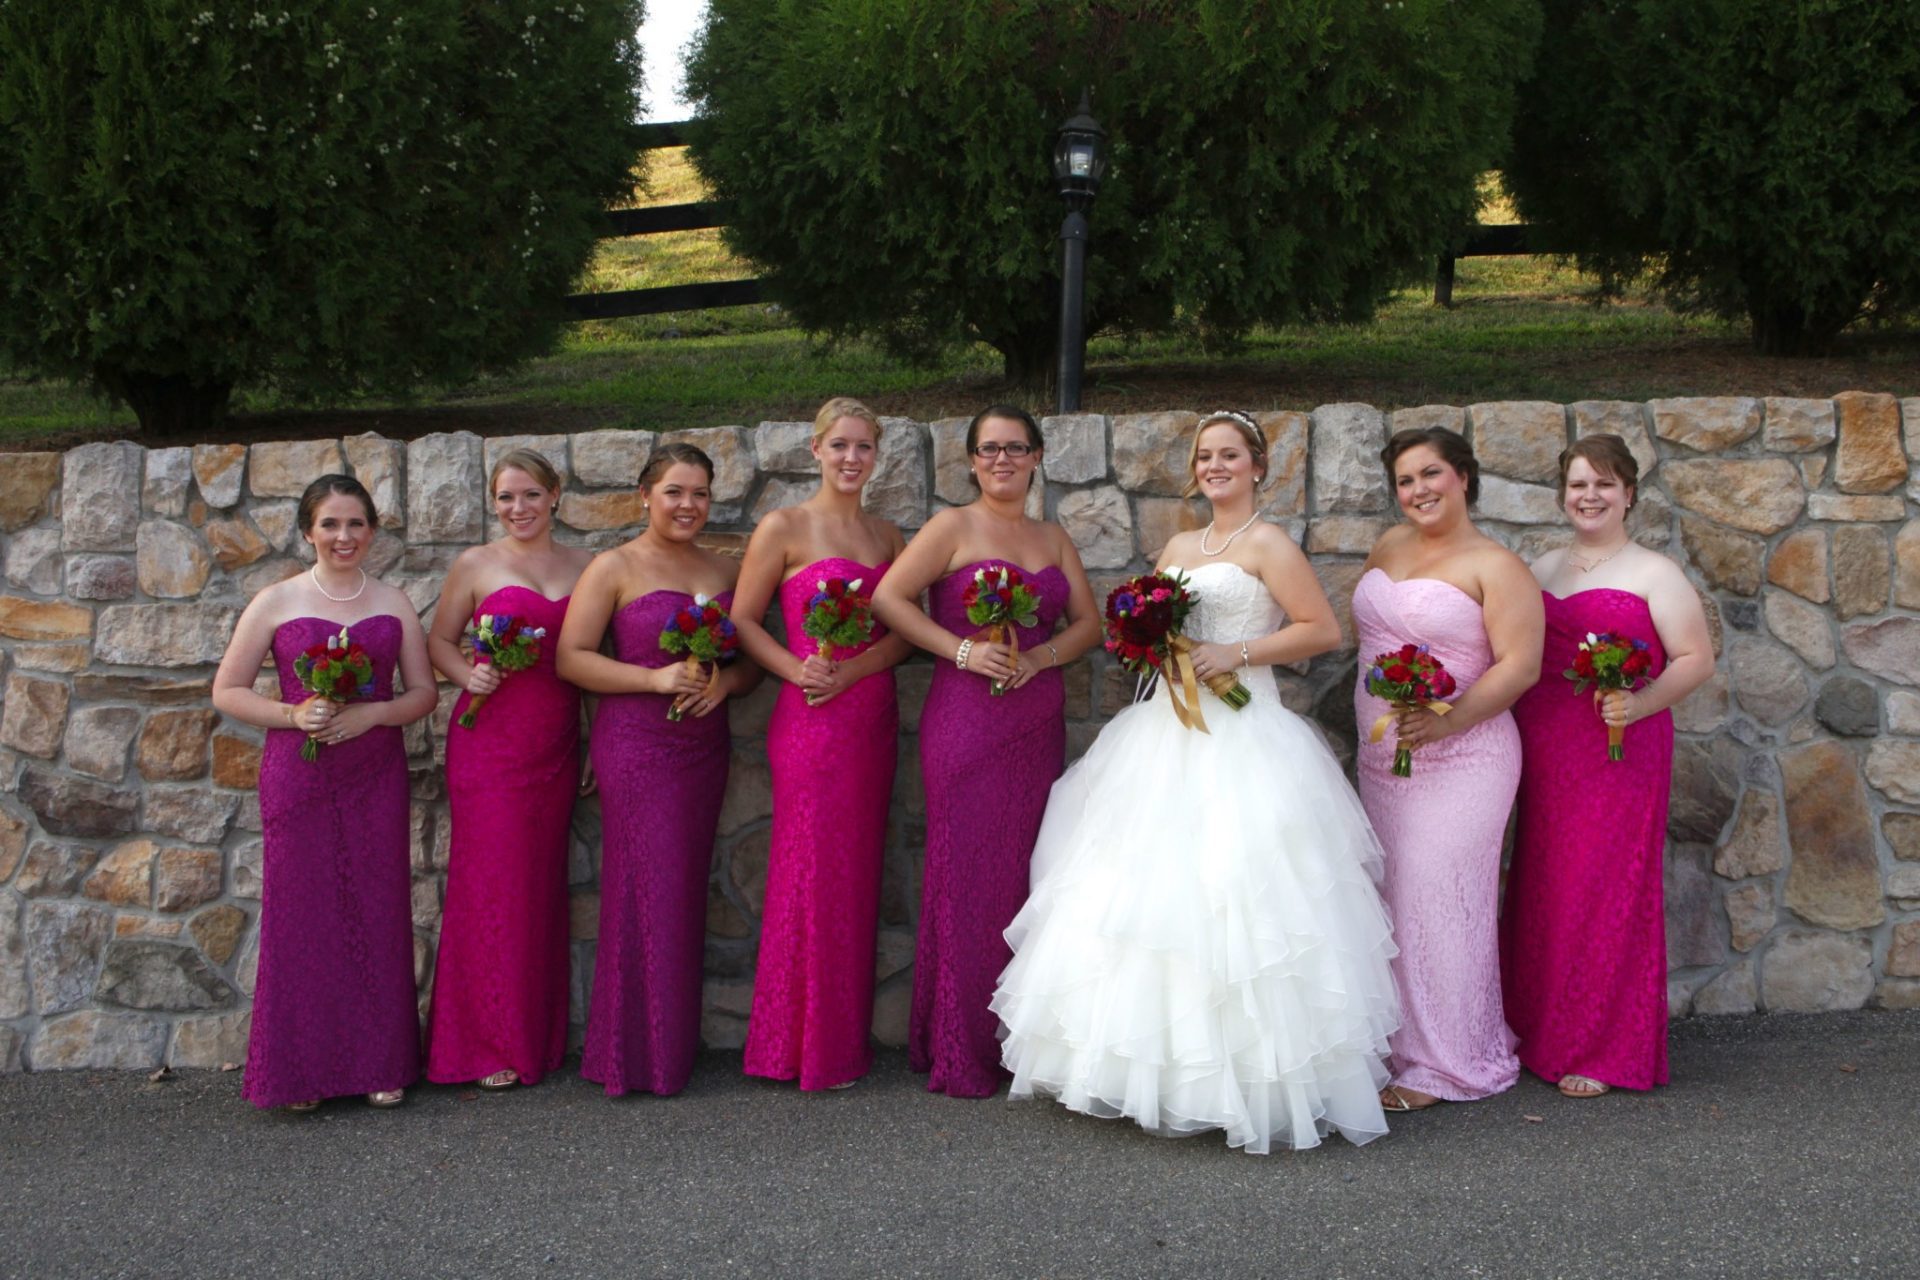 Bridal party poses by stone wall in front of Morningside Inn wedding venue in Frederick MD